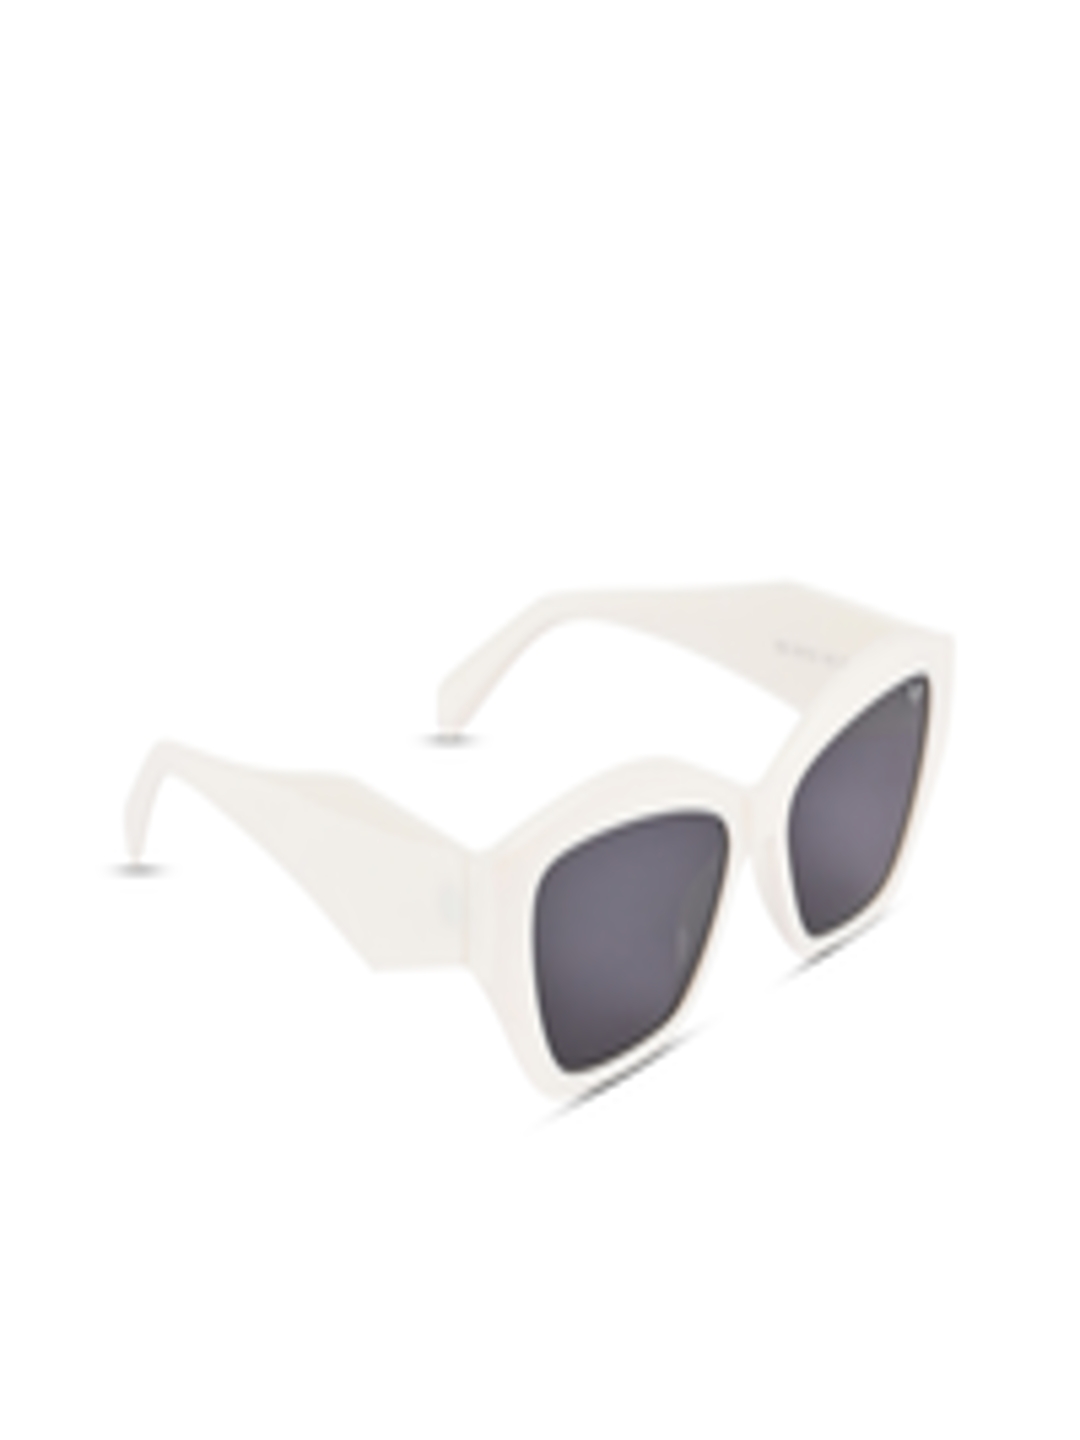 Buy Voyage Women Black Lens & White Oval Sunglasses With UV Protected ...